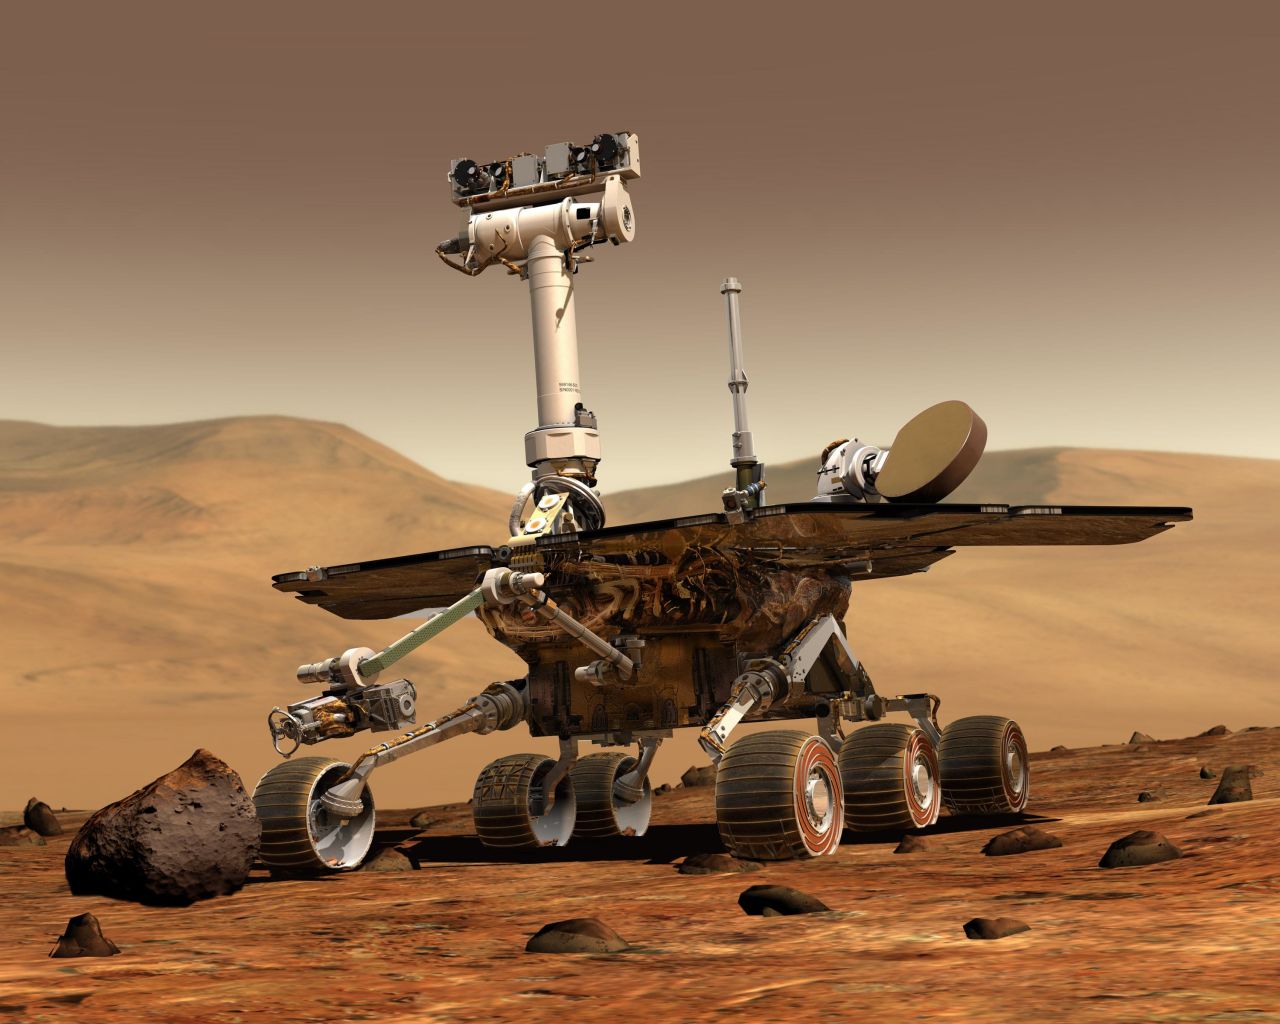 NASA's twin rovers, Spirit and Opportunity, have revealed many secrets of the Red Planet since landing on Mars in January 2004. Spirit stopped communicating in 2010, but Opportunity is still collecting data. This illustration depicts the identical look of both rovers.